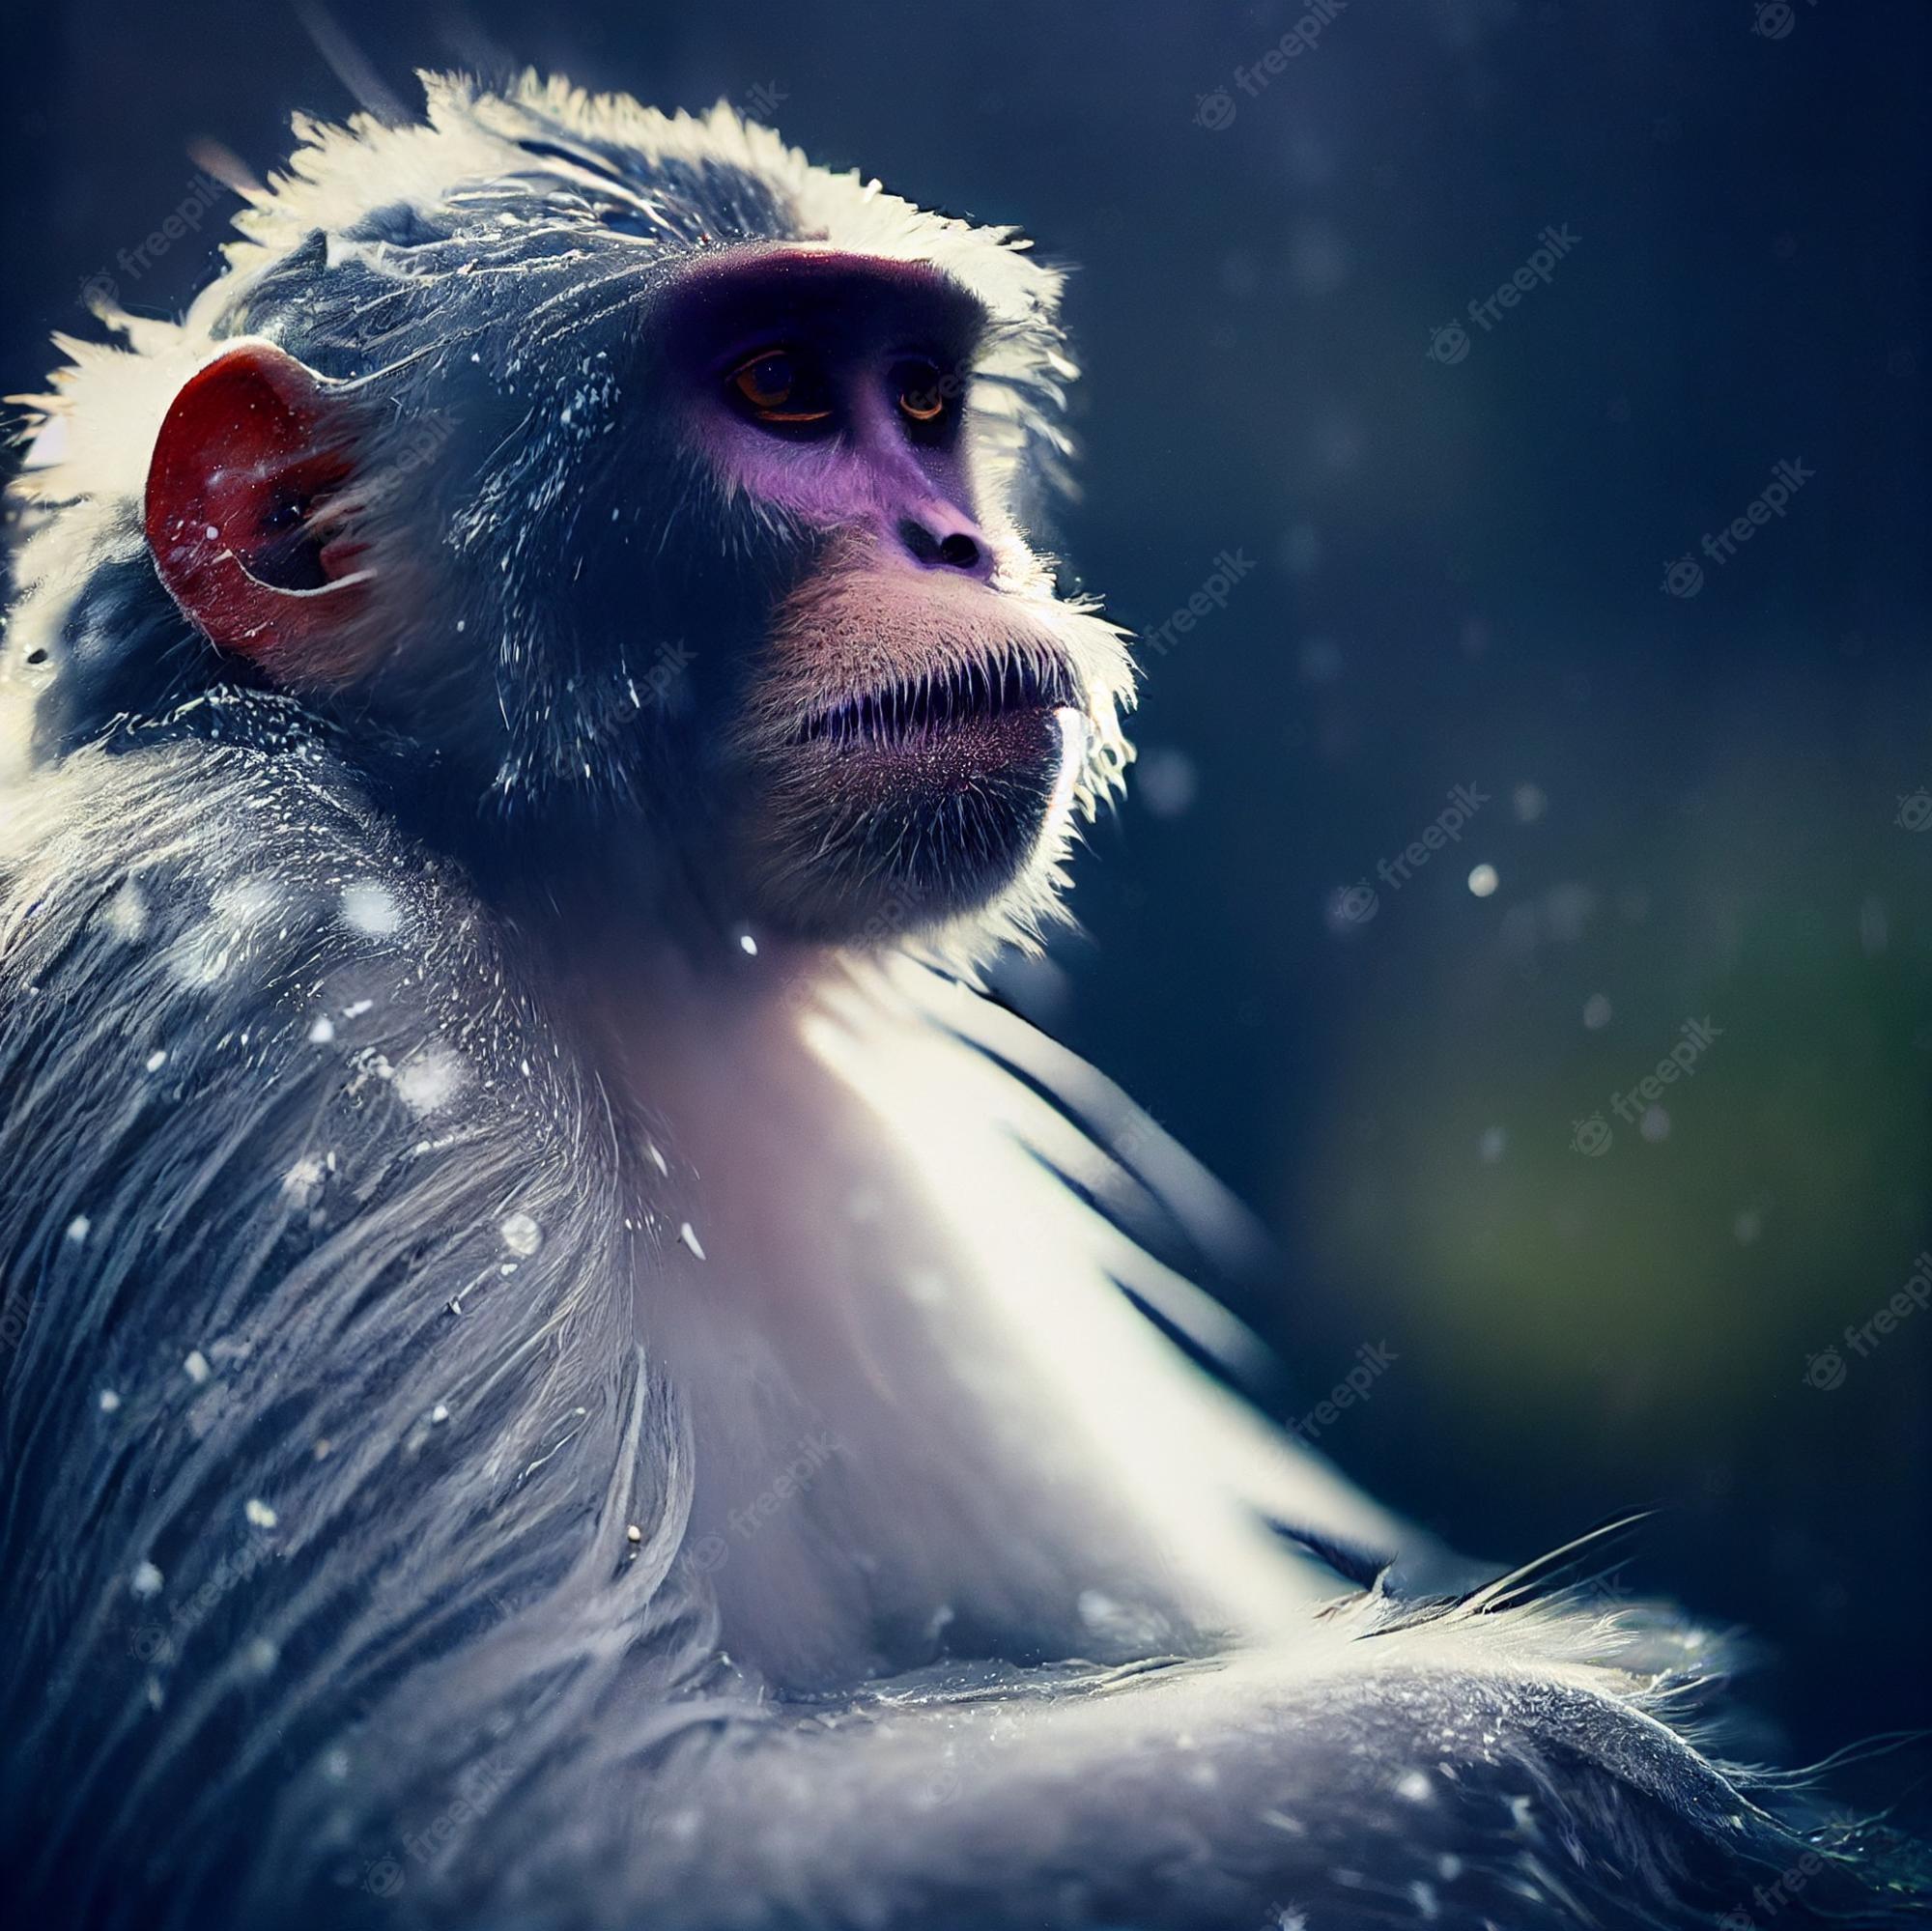 Premium Photo Frozen white monkey covered by snow 3d rendering